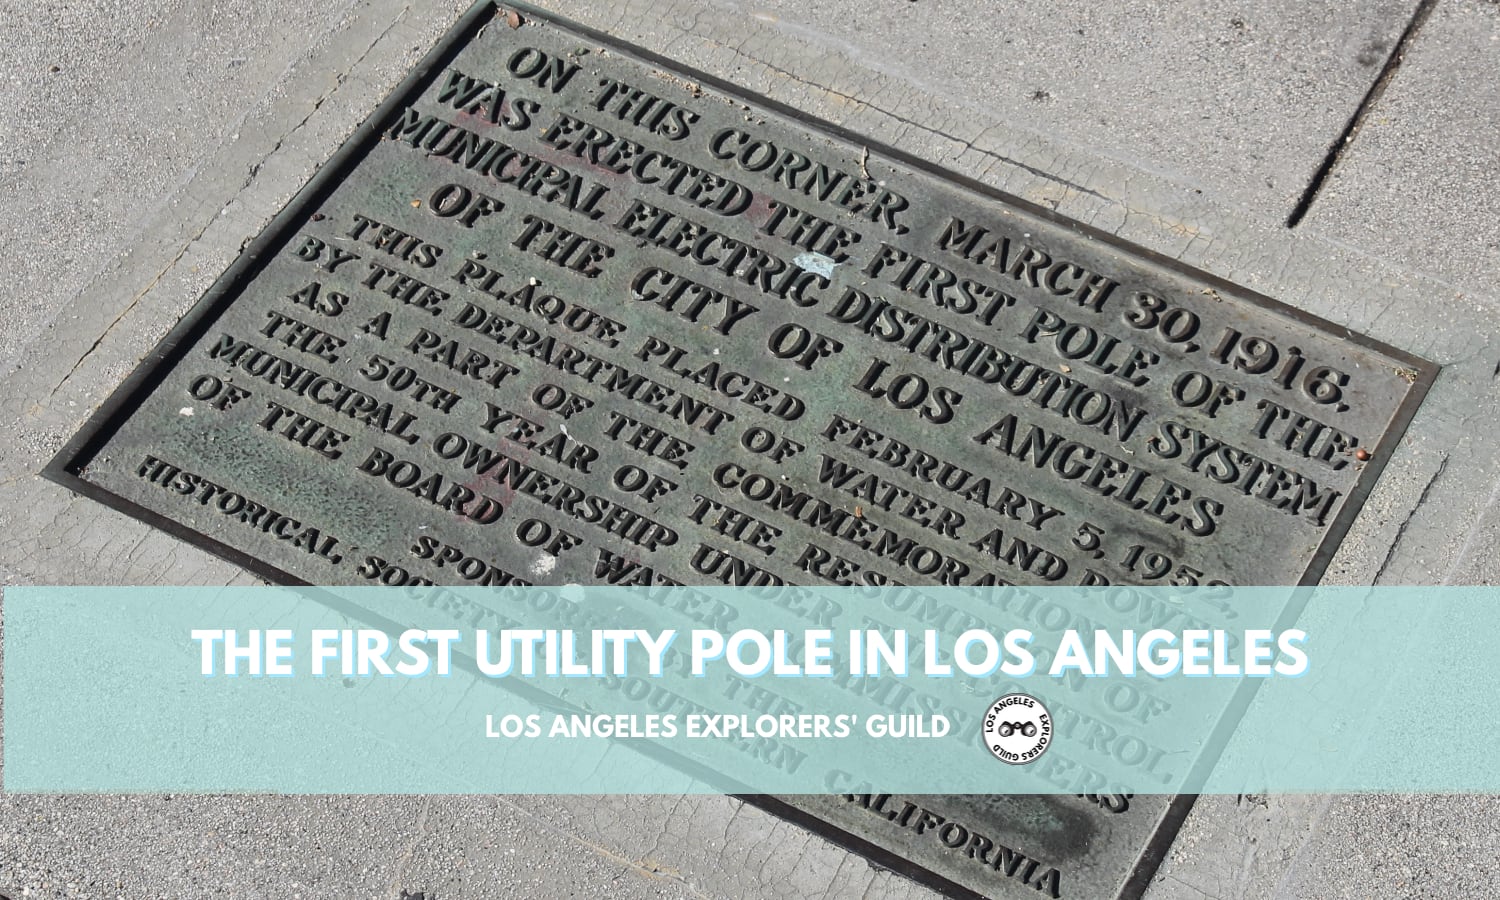 Plaque marking the location of the first utility pole in Los Angeles — Los Angeles Explorers Guild